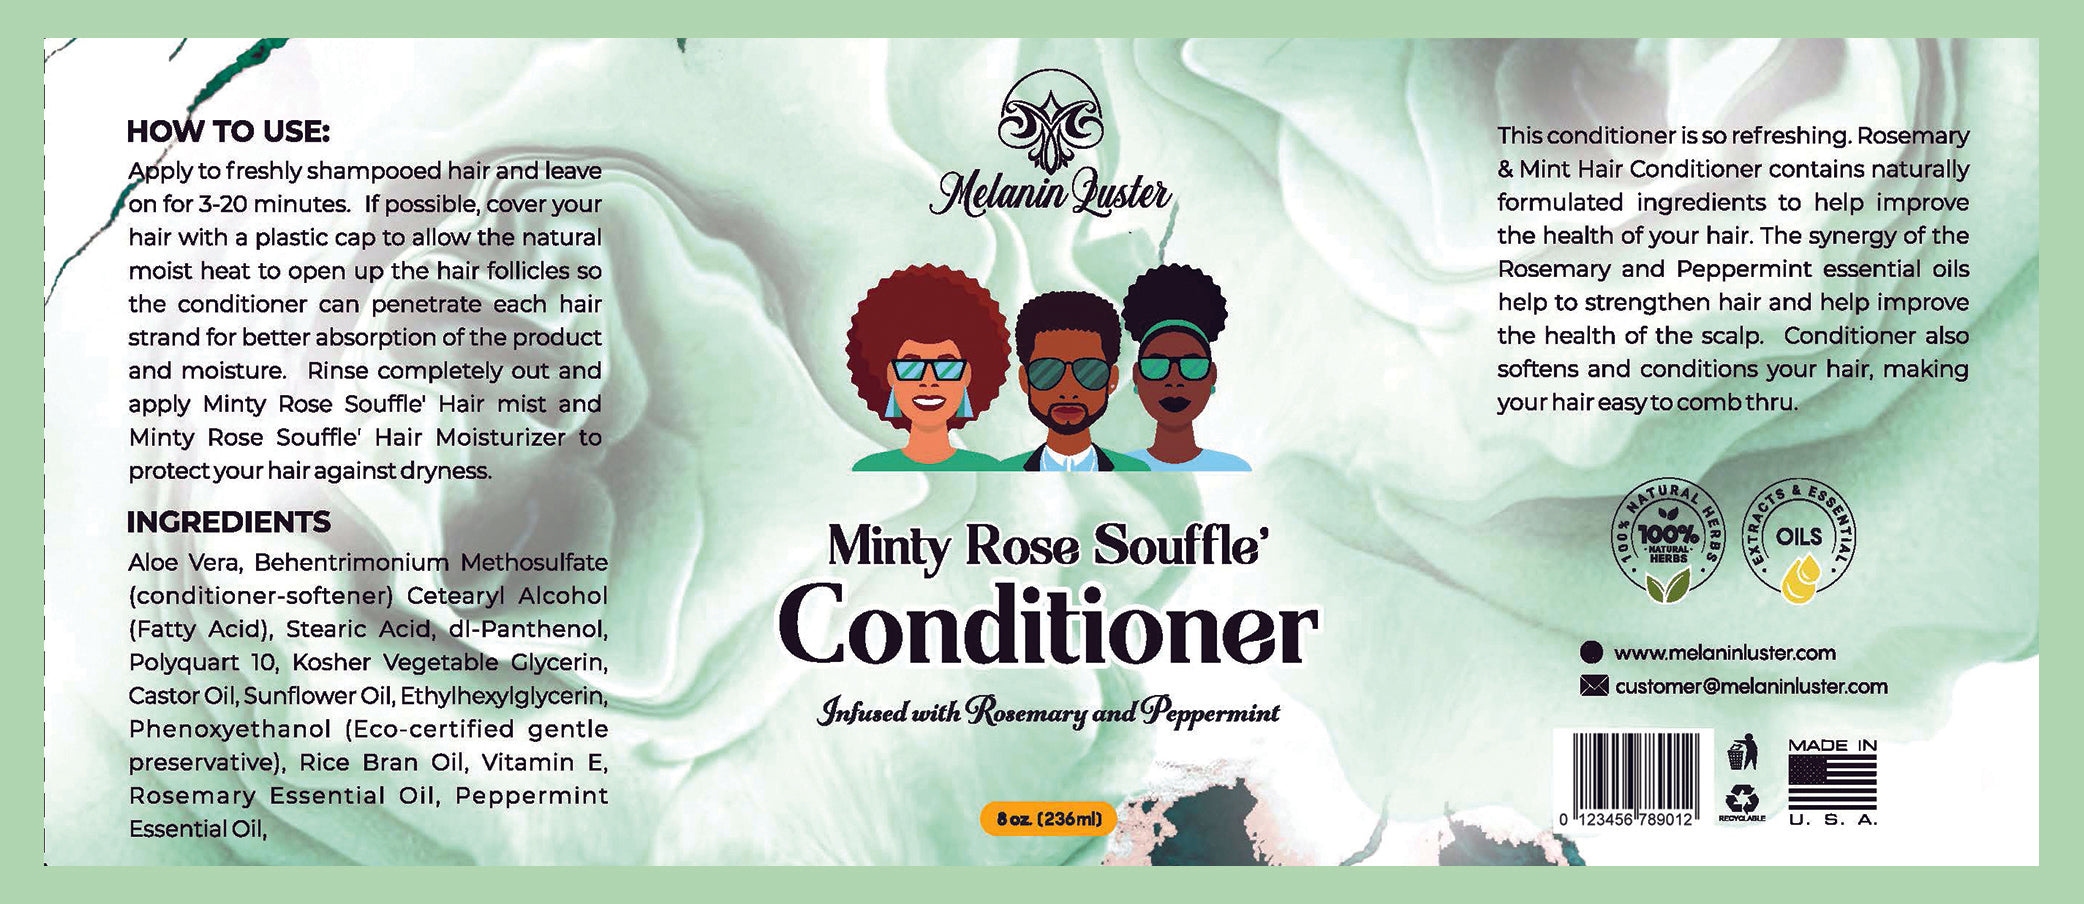 Minty Rose Souffle' Cleanse and Condition Bundle